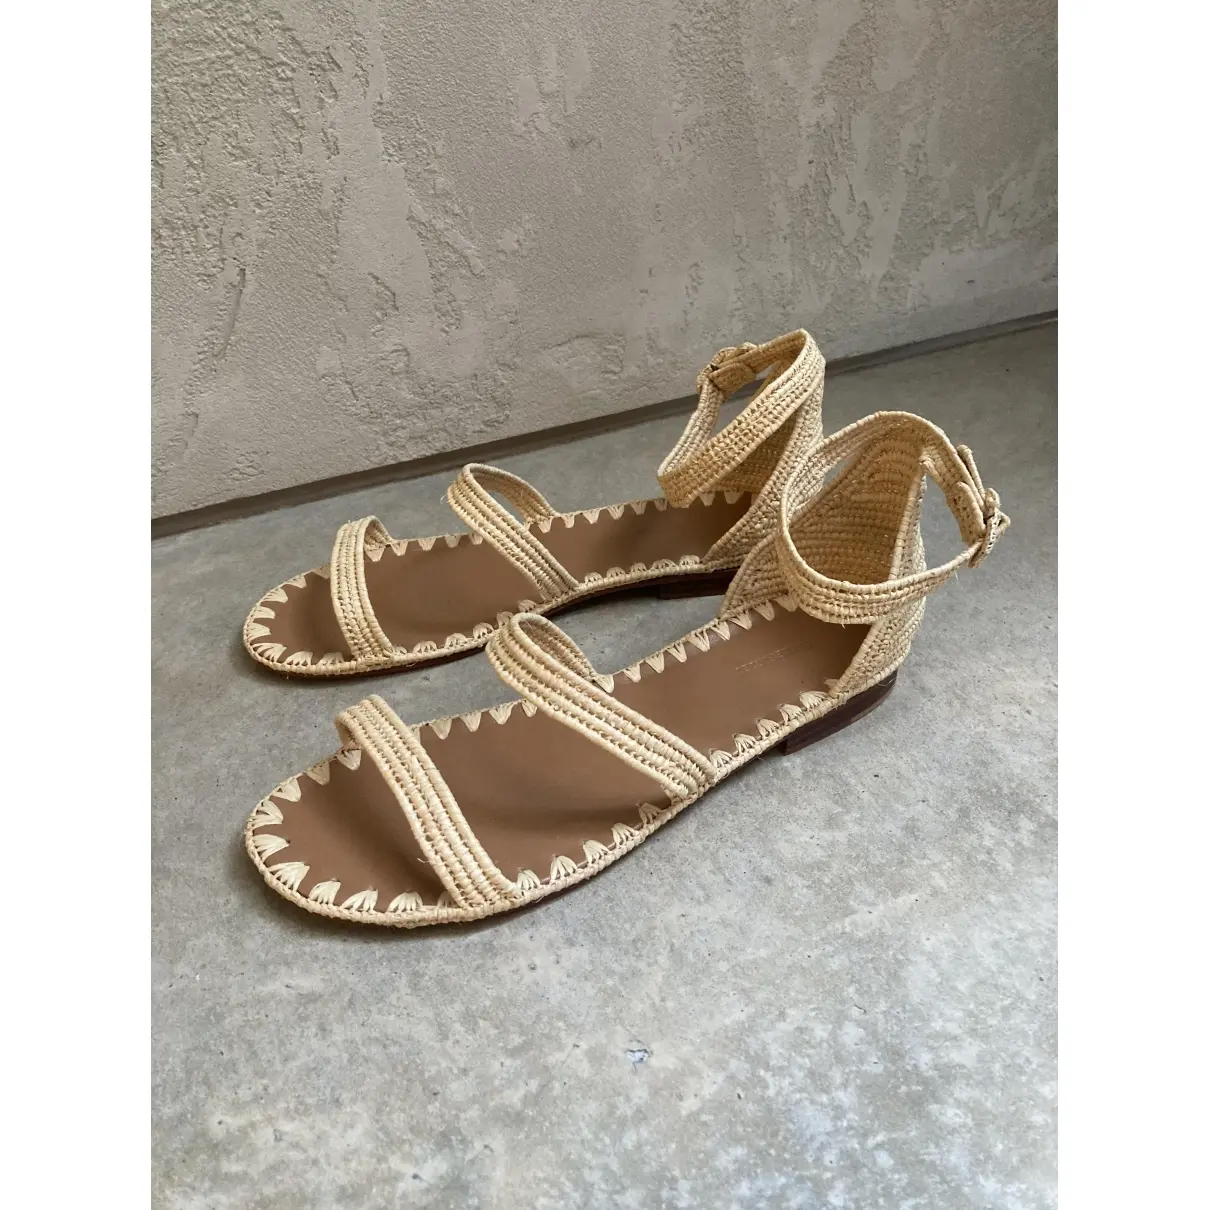 Buy Carrie Forbes Cloth sandal online